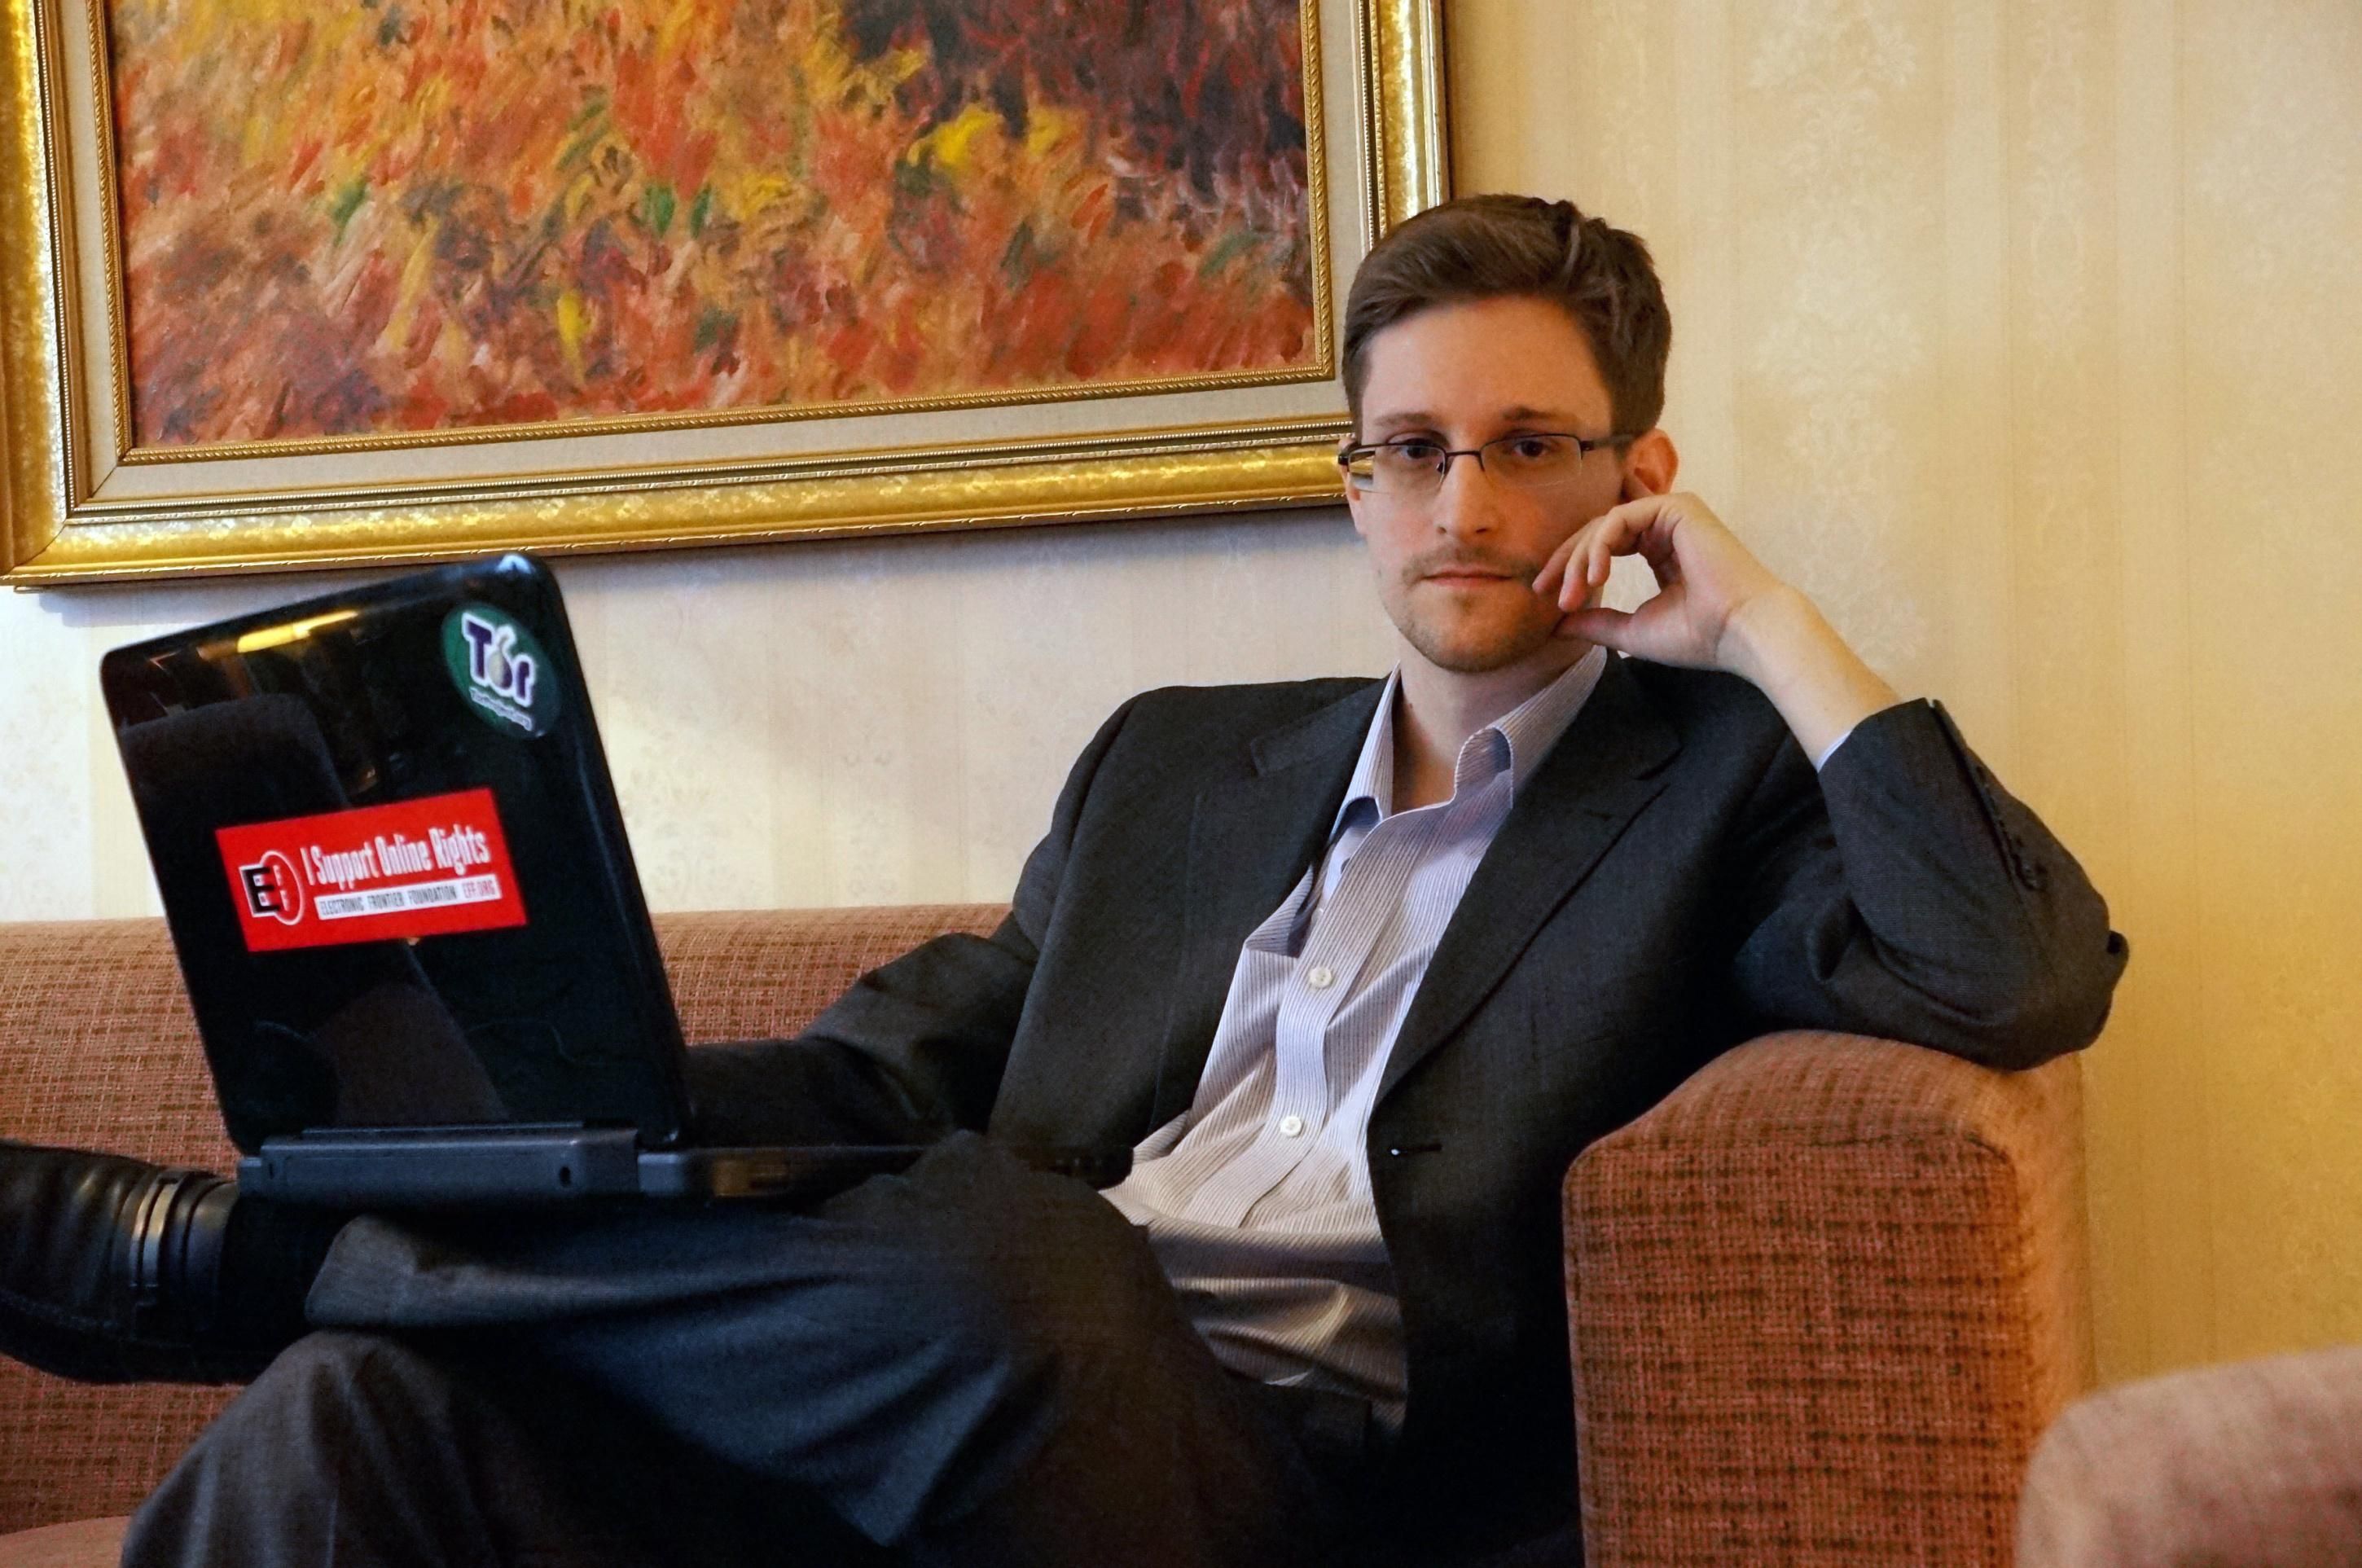 Former intelligence contractor Edward Snowden poses for a photo during an interview in an undisclosed location in December 2013 in Moscow, Russia. (Photo: Barton Gellman via Getty Images)